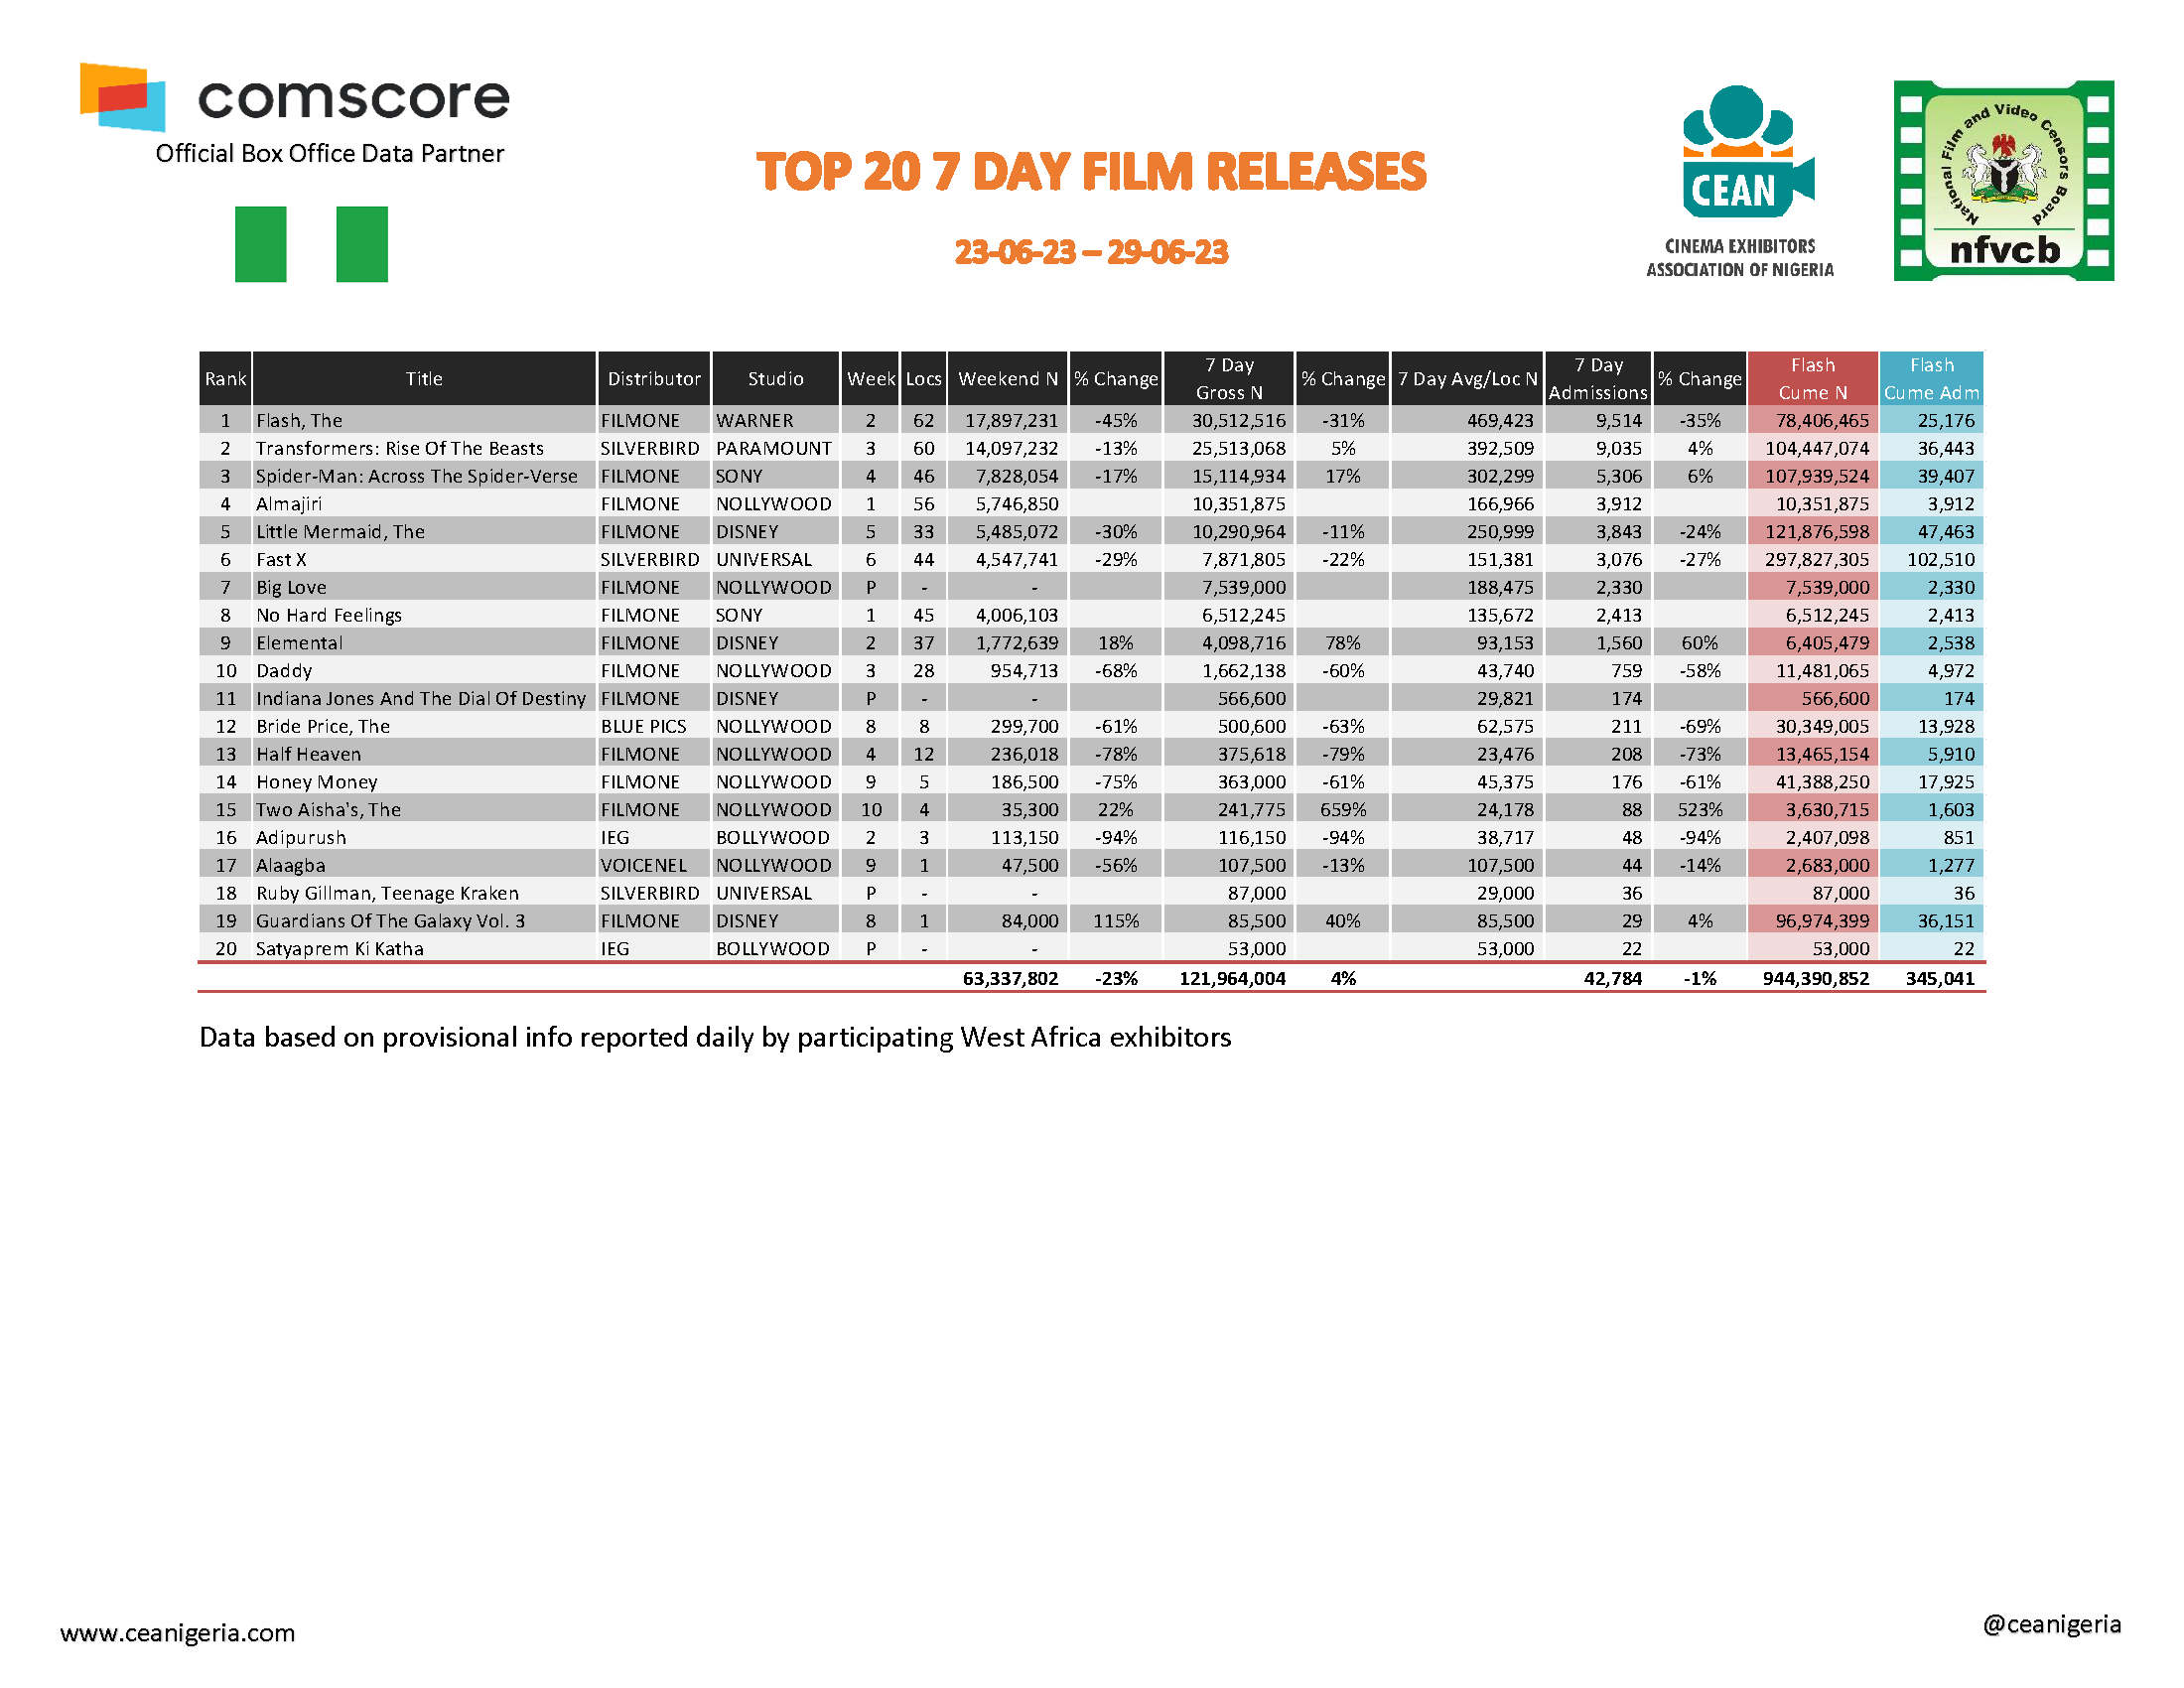 Top 20 films 7 Day 23rd 29th June